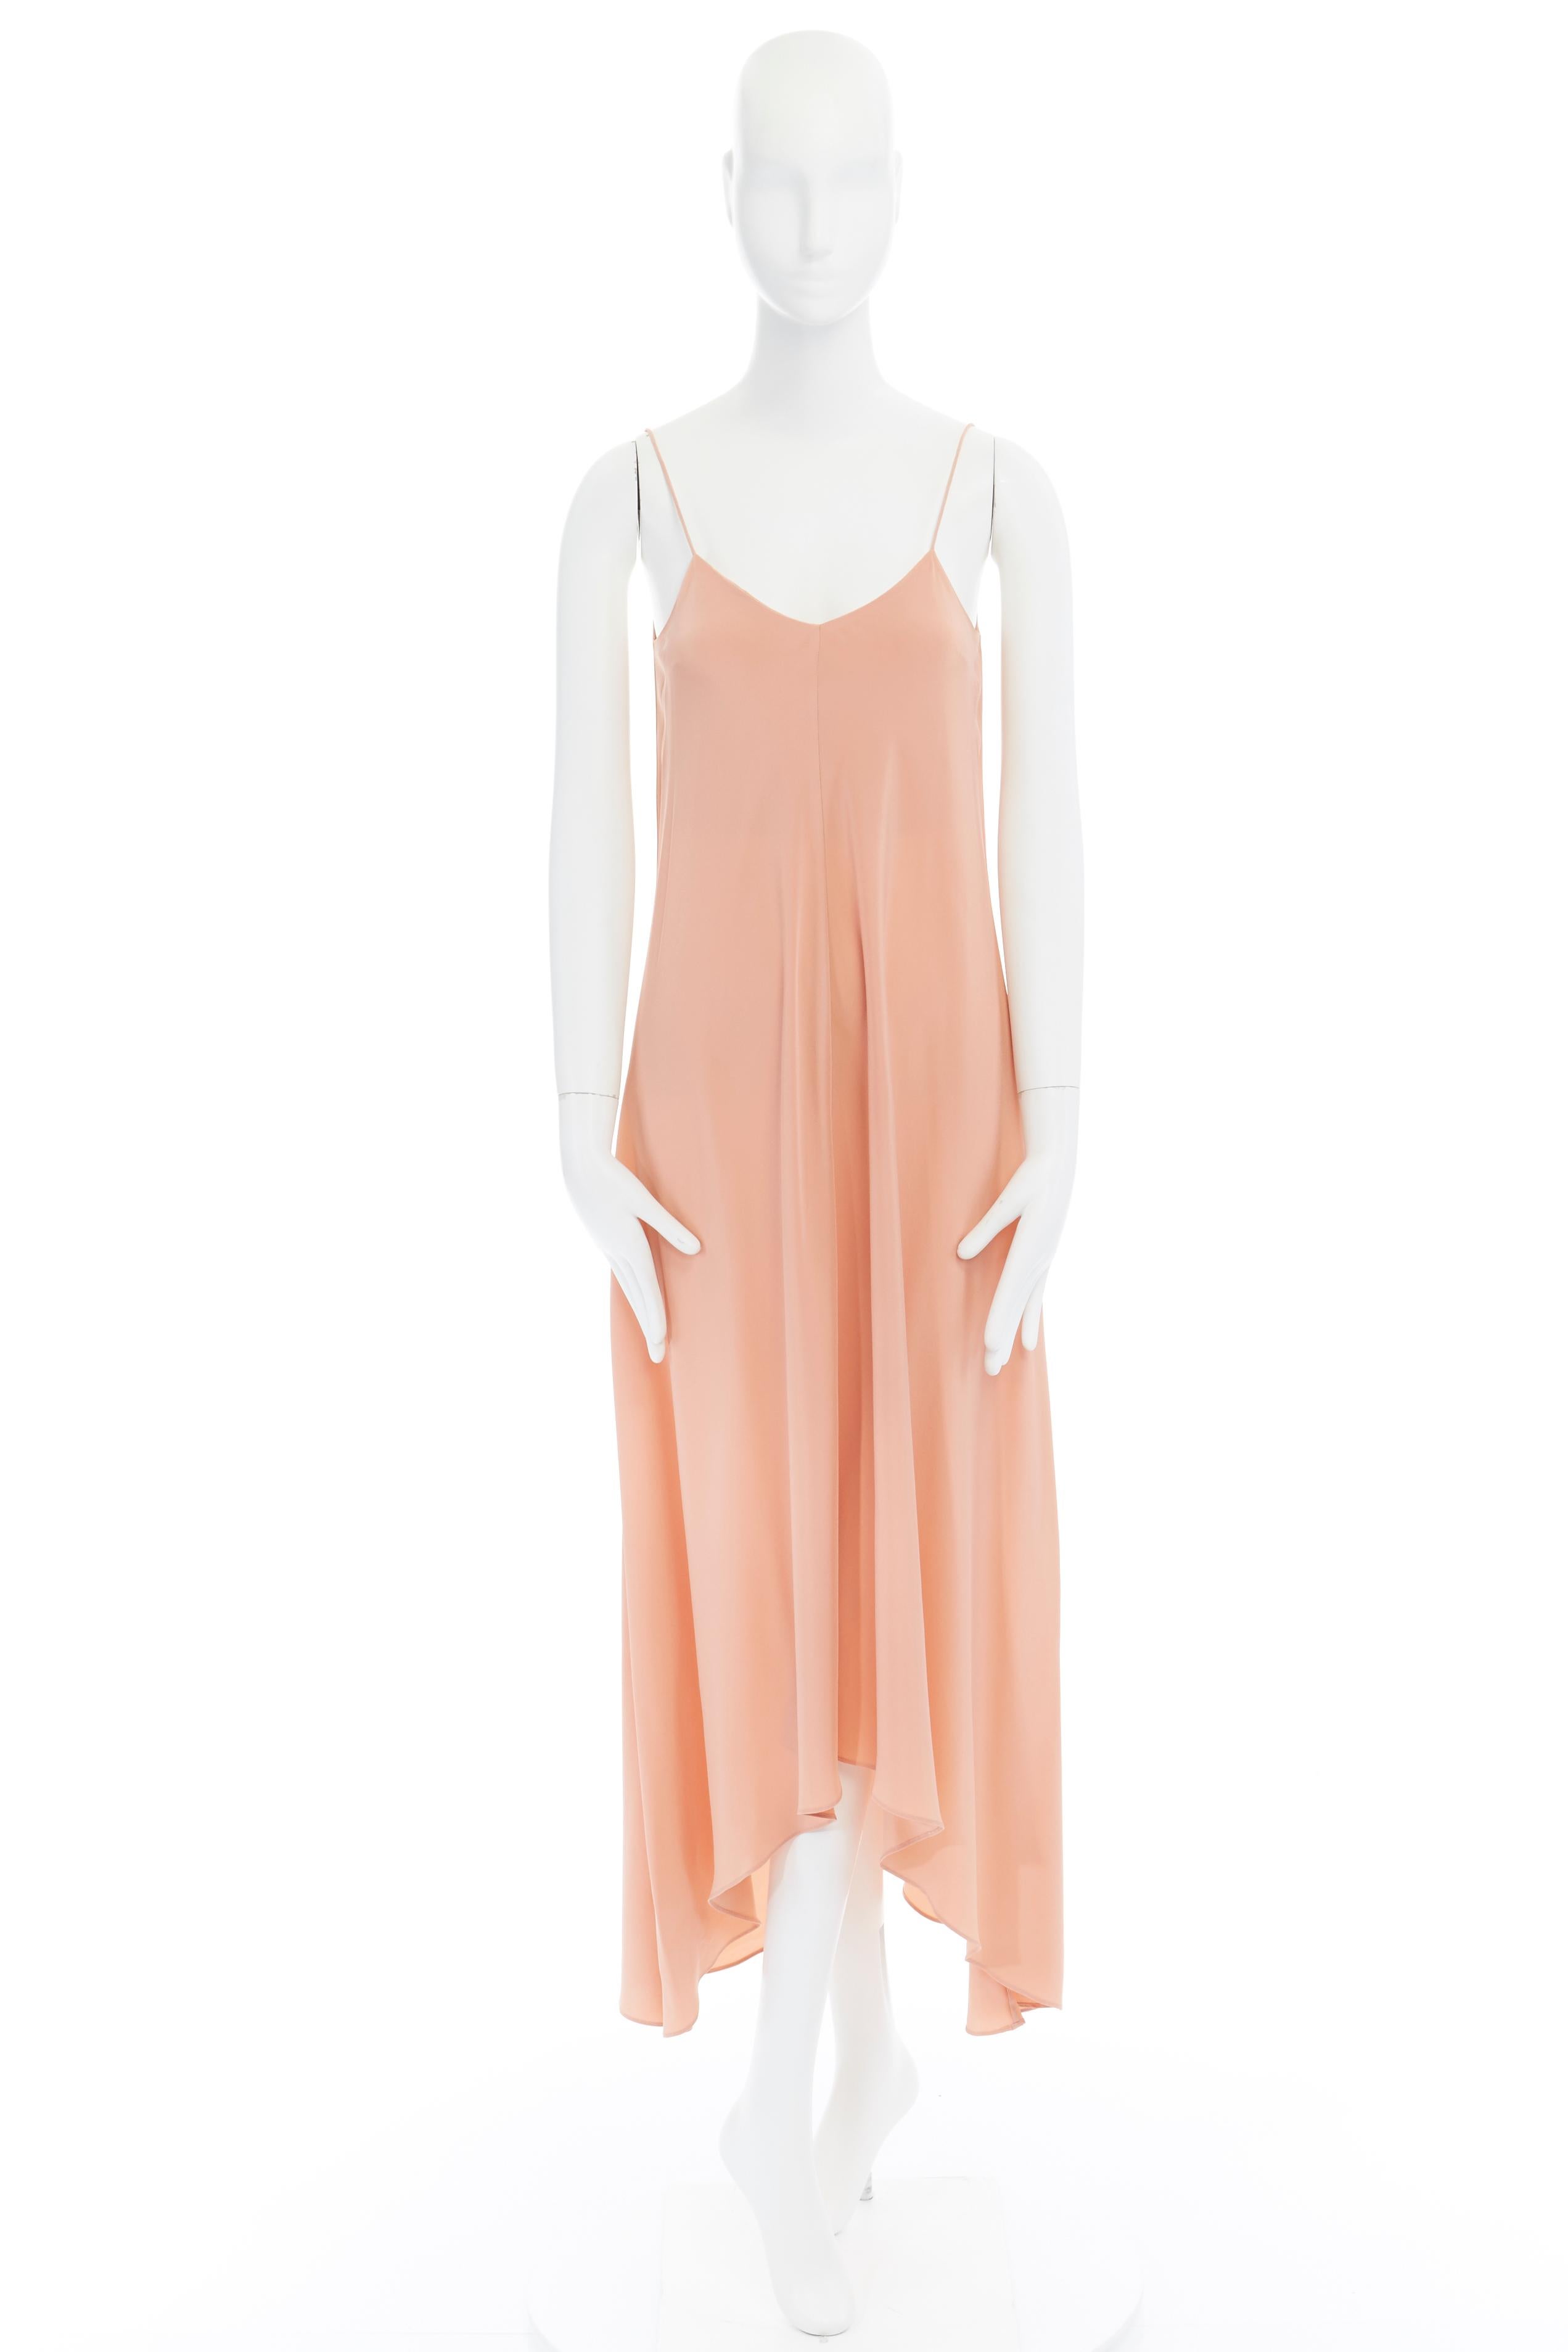 TIBI 100% silk salmon pink nude V-neck spaghetti strap high low slip dress US0 
Reference: LNKO/A00763 
Brand: Tibi 
Material: Silk 
Color: Pink 
Pattern: Solid 
Extra Detail: Fully lined. 
Made in: China 

CONDITION: 
Condition: Very good, this